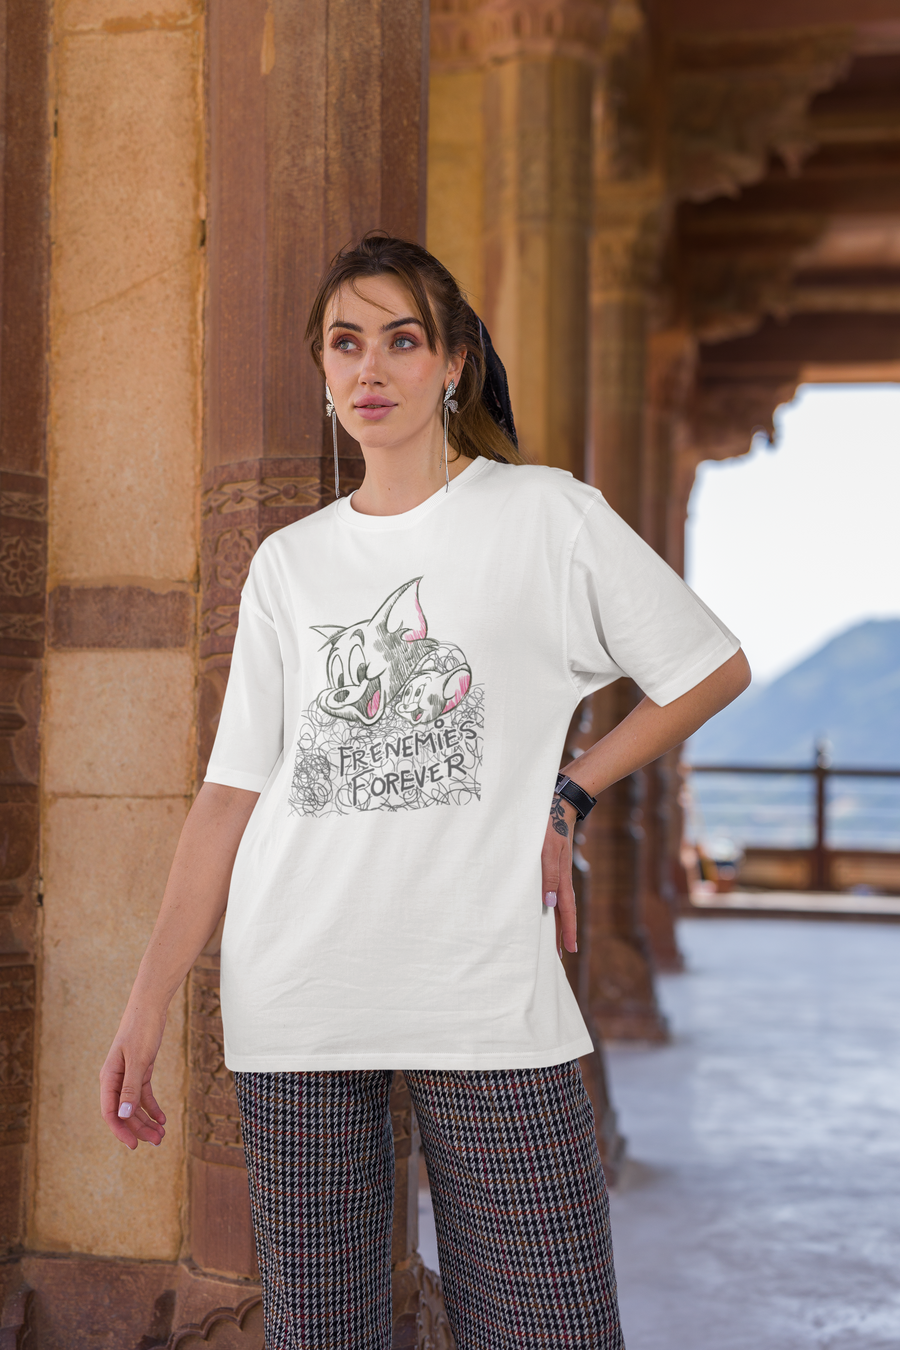 Official Tom & Jerry - Frenemies Forever Oversized T-Shirt